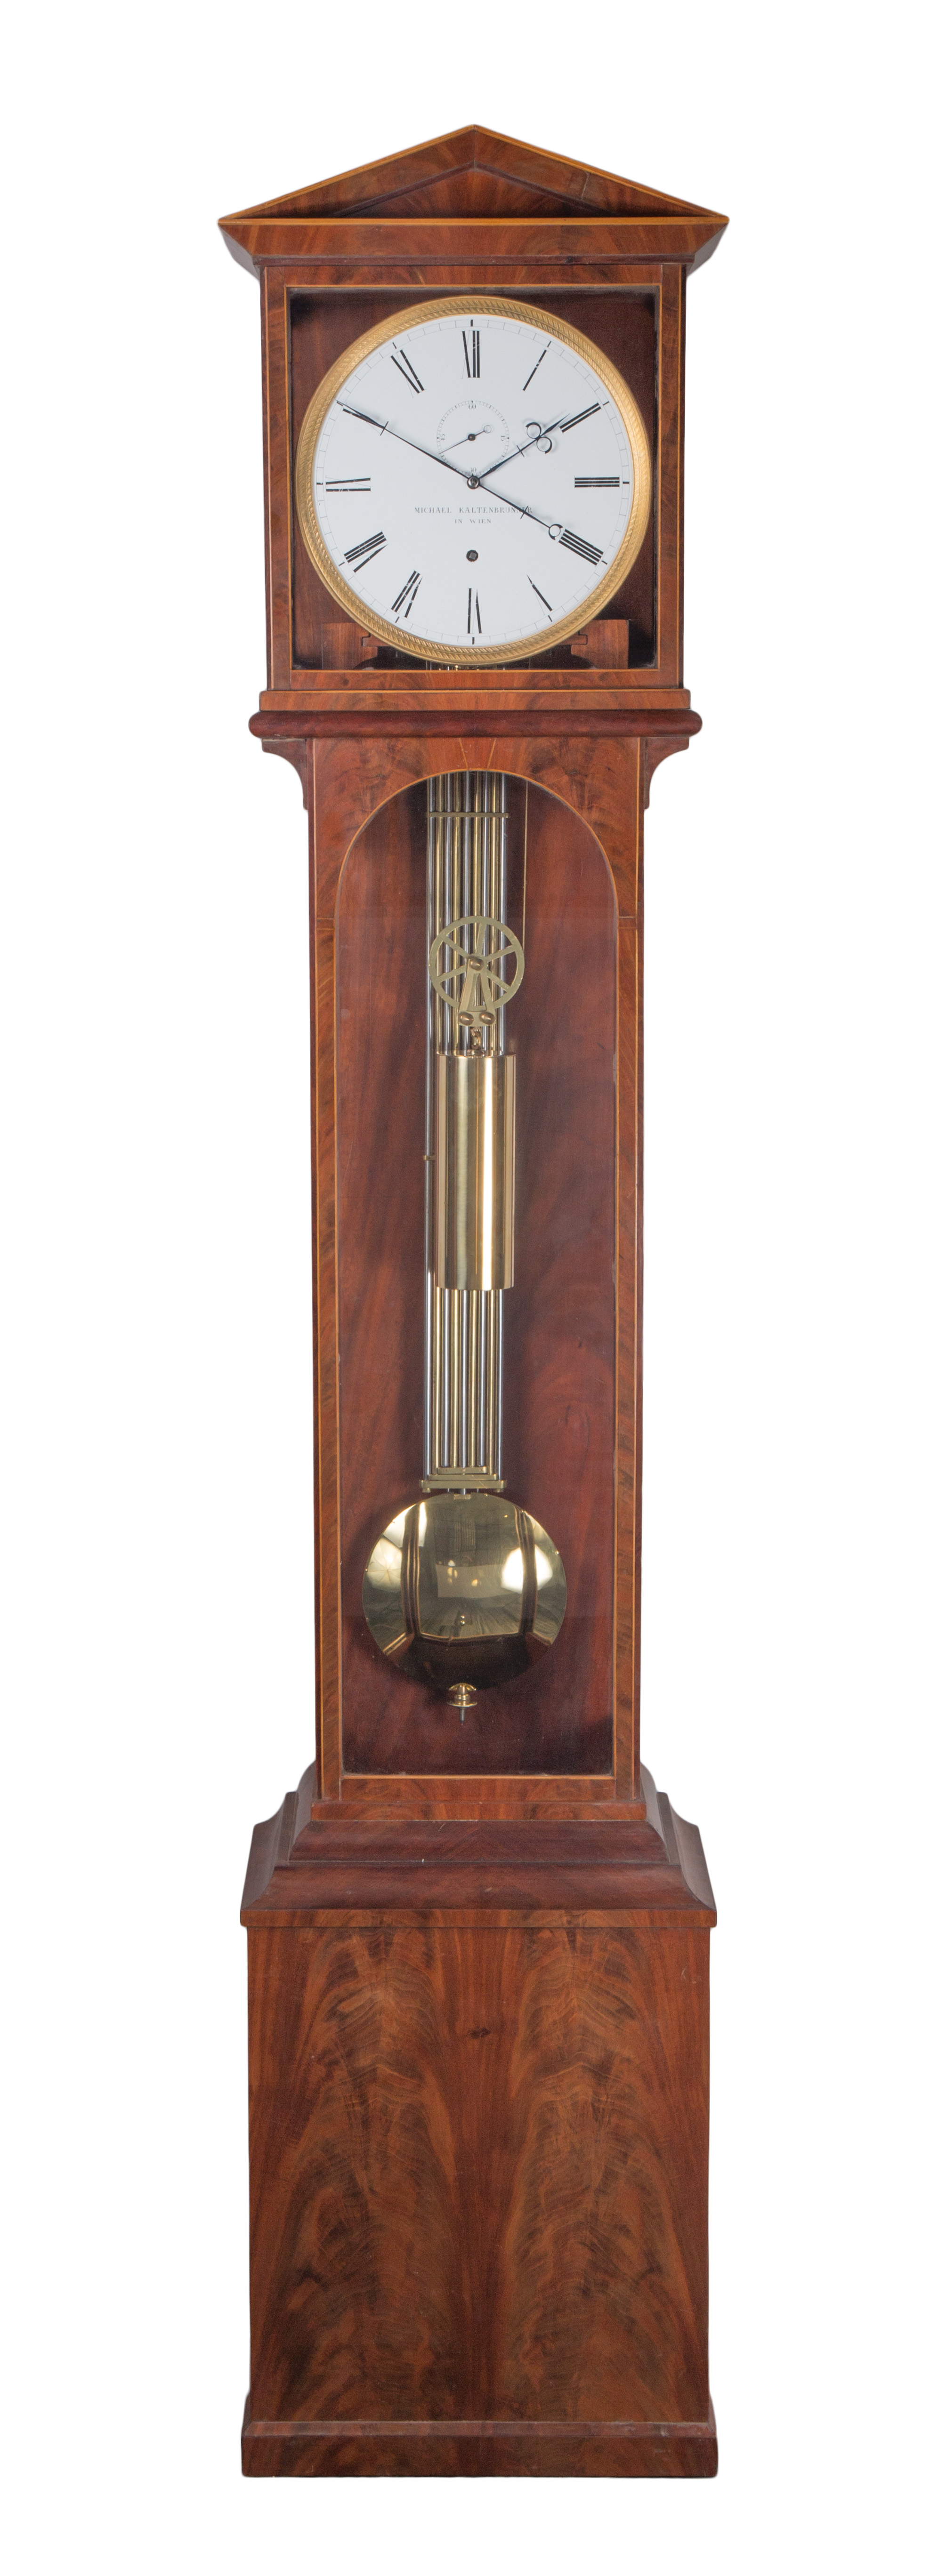 Longcase clock by Michael Kaltenbrunner with 285 days duration, c. 1835.